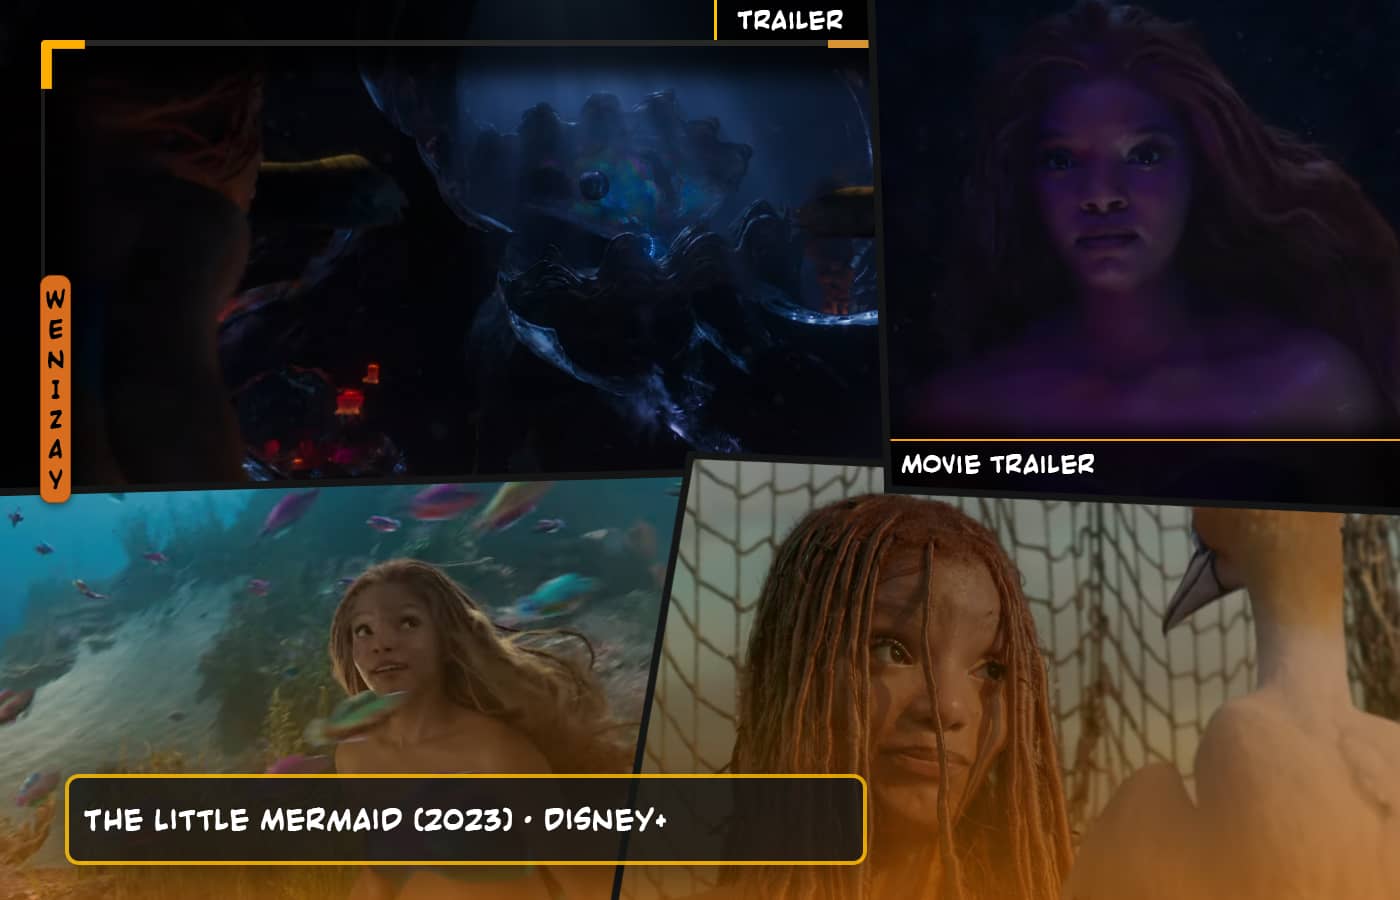 Dive into the world of "The Little Mermaid" with the 2023 fantasy movie trailer, available to watch online